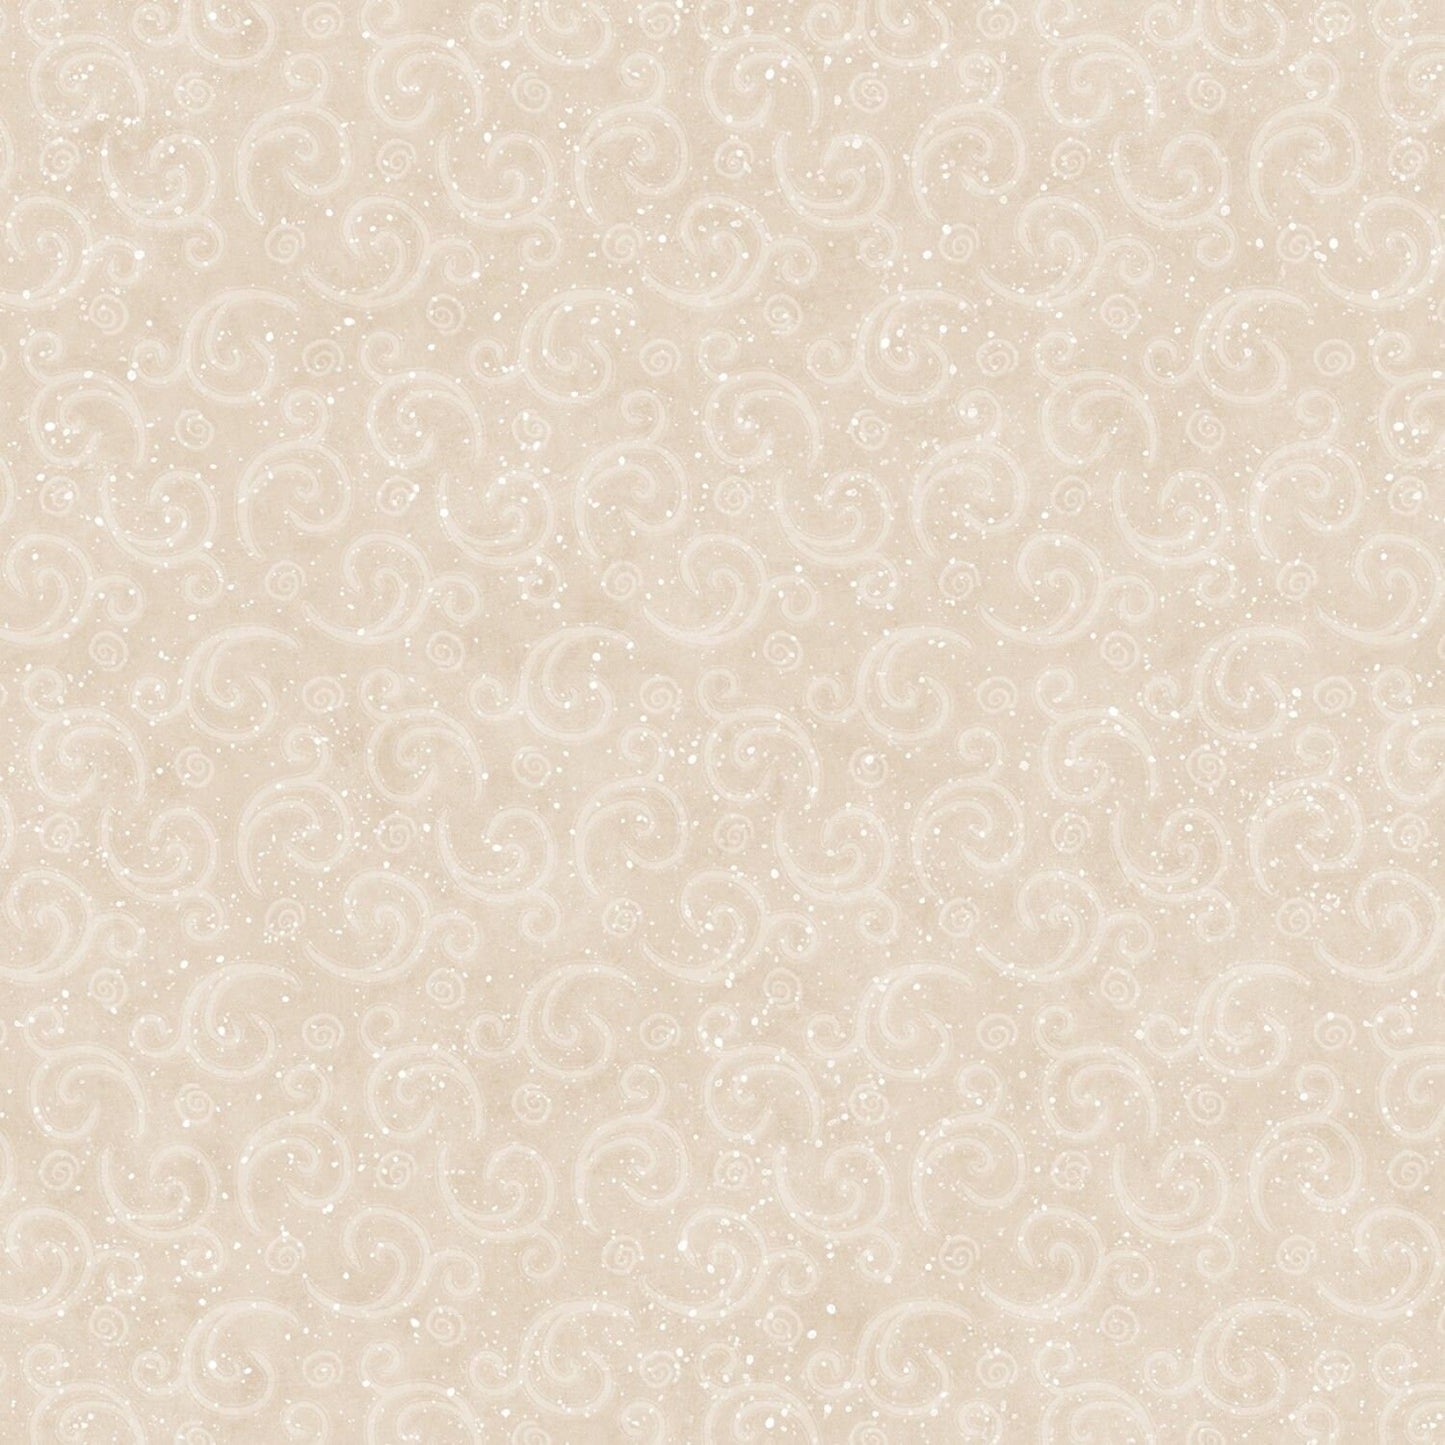 I Love SN'Gnomes by Shelly Comisky Swirl Beige F9638-33 100% Cotton Flannel Fabric